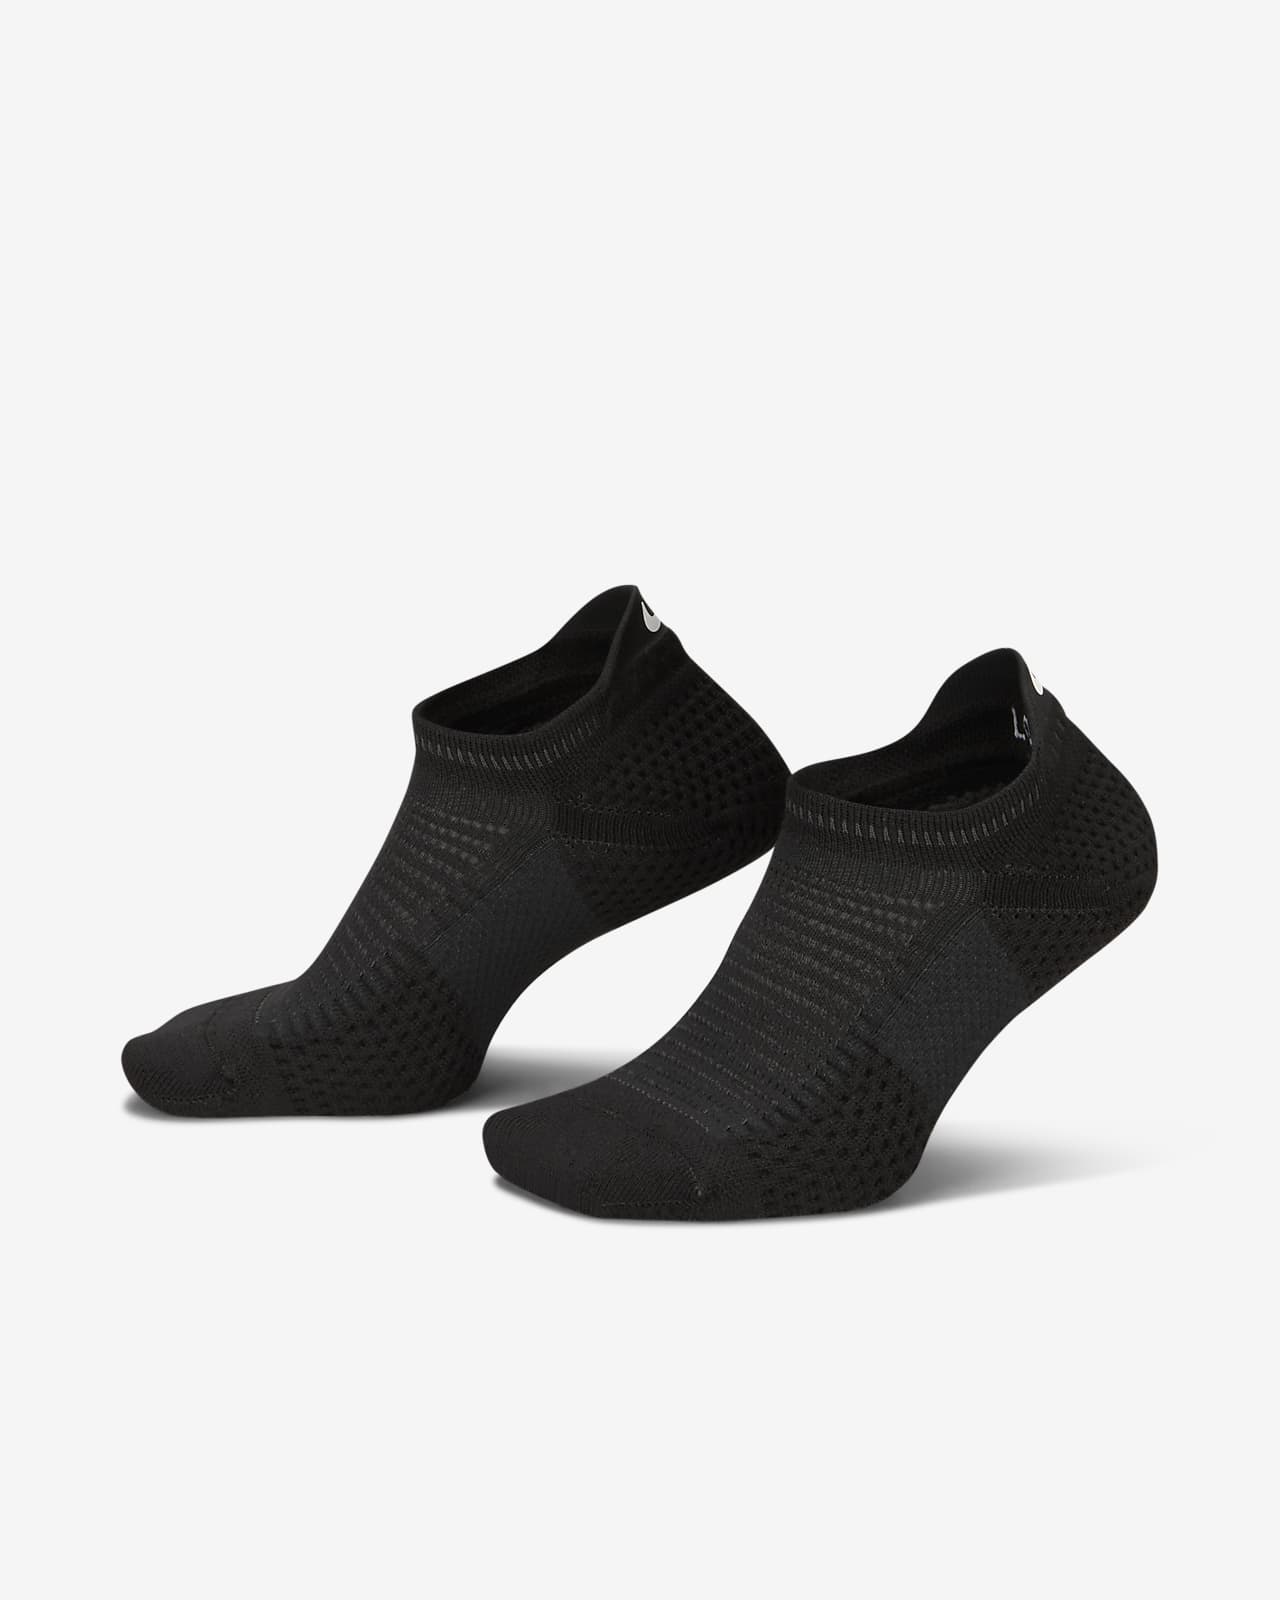 Kind Performance Sock Shoe and It's Out Now – Fonjep News - of - Its - nike  air with built gel sole sneakers for sale - Nike Made a First